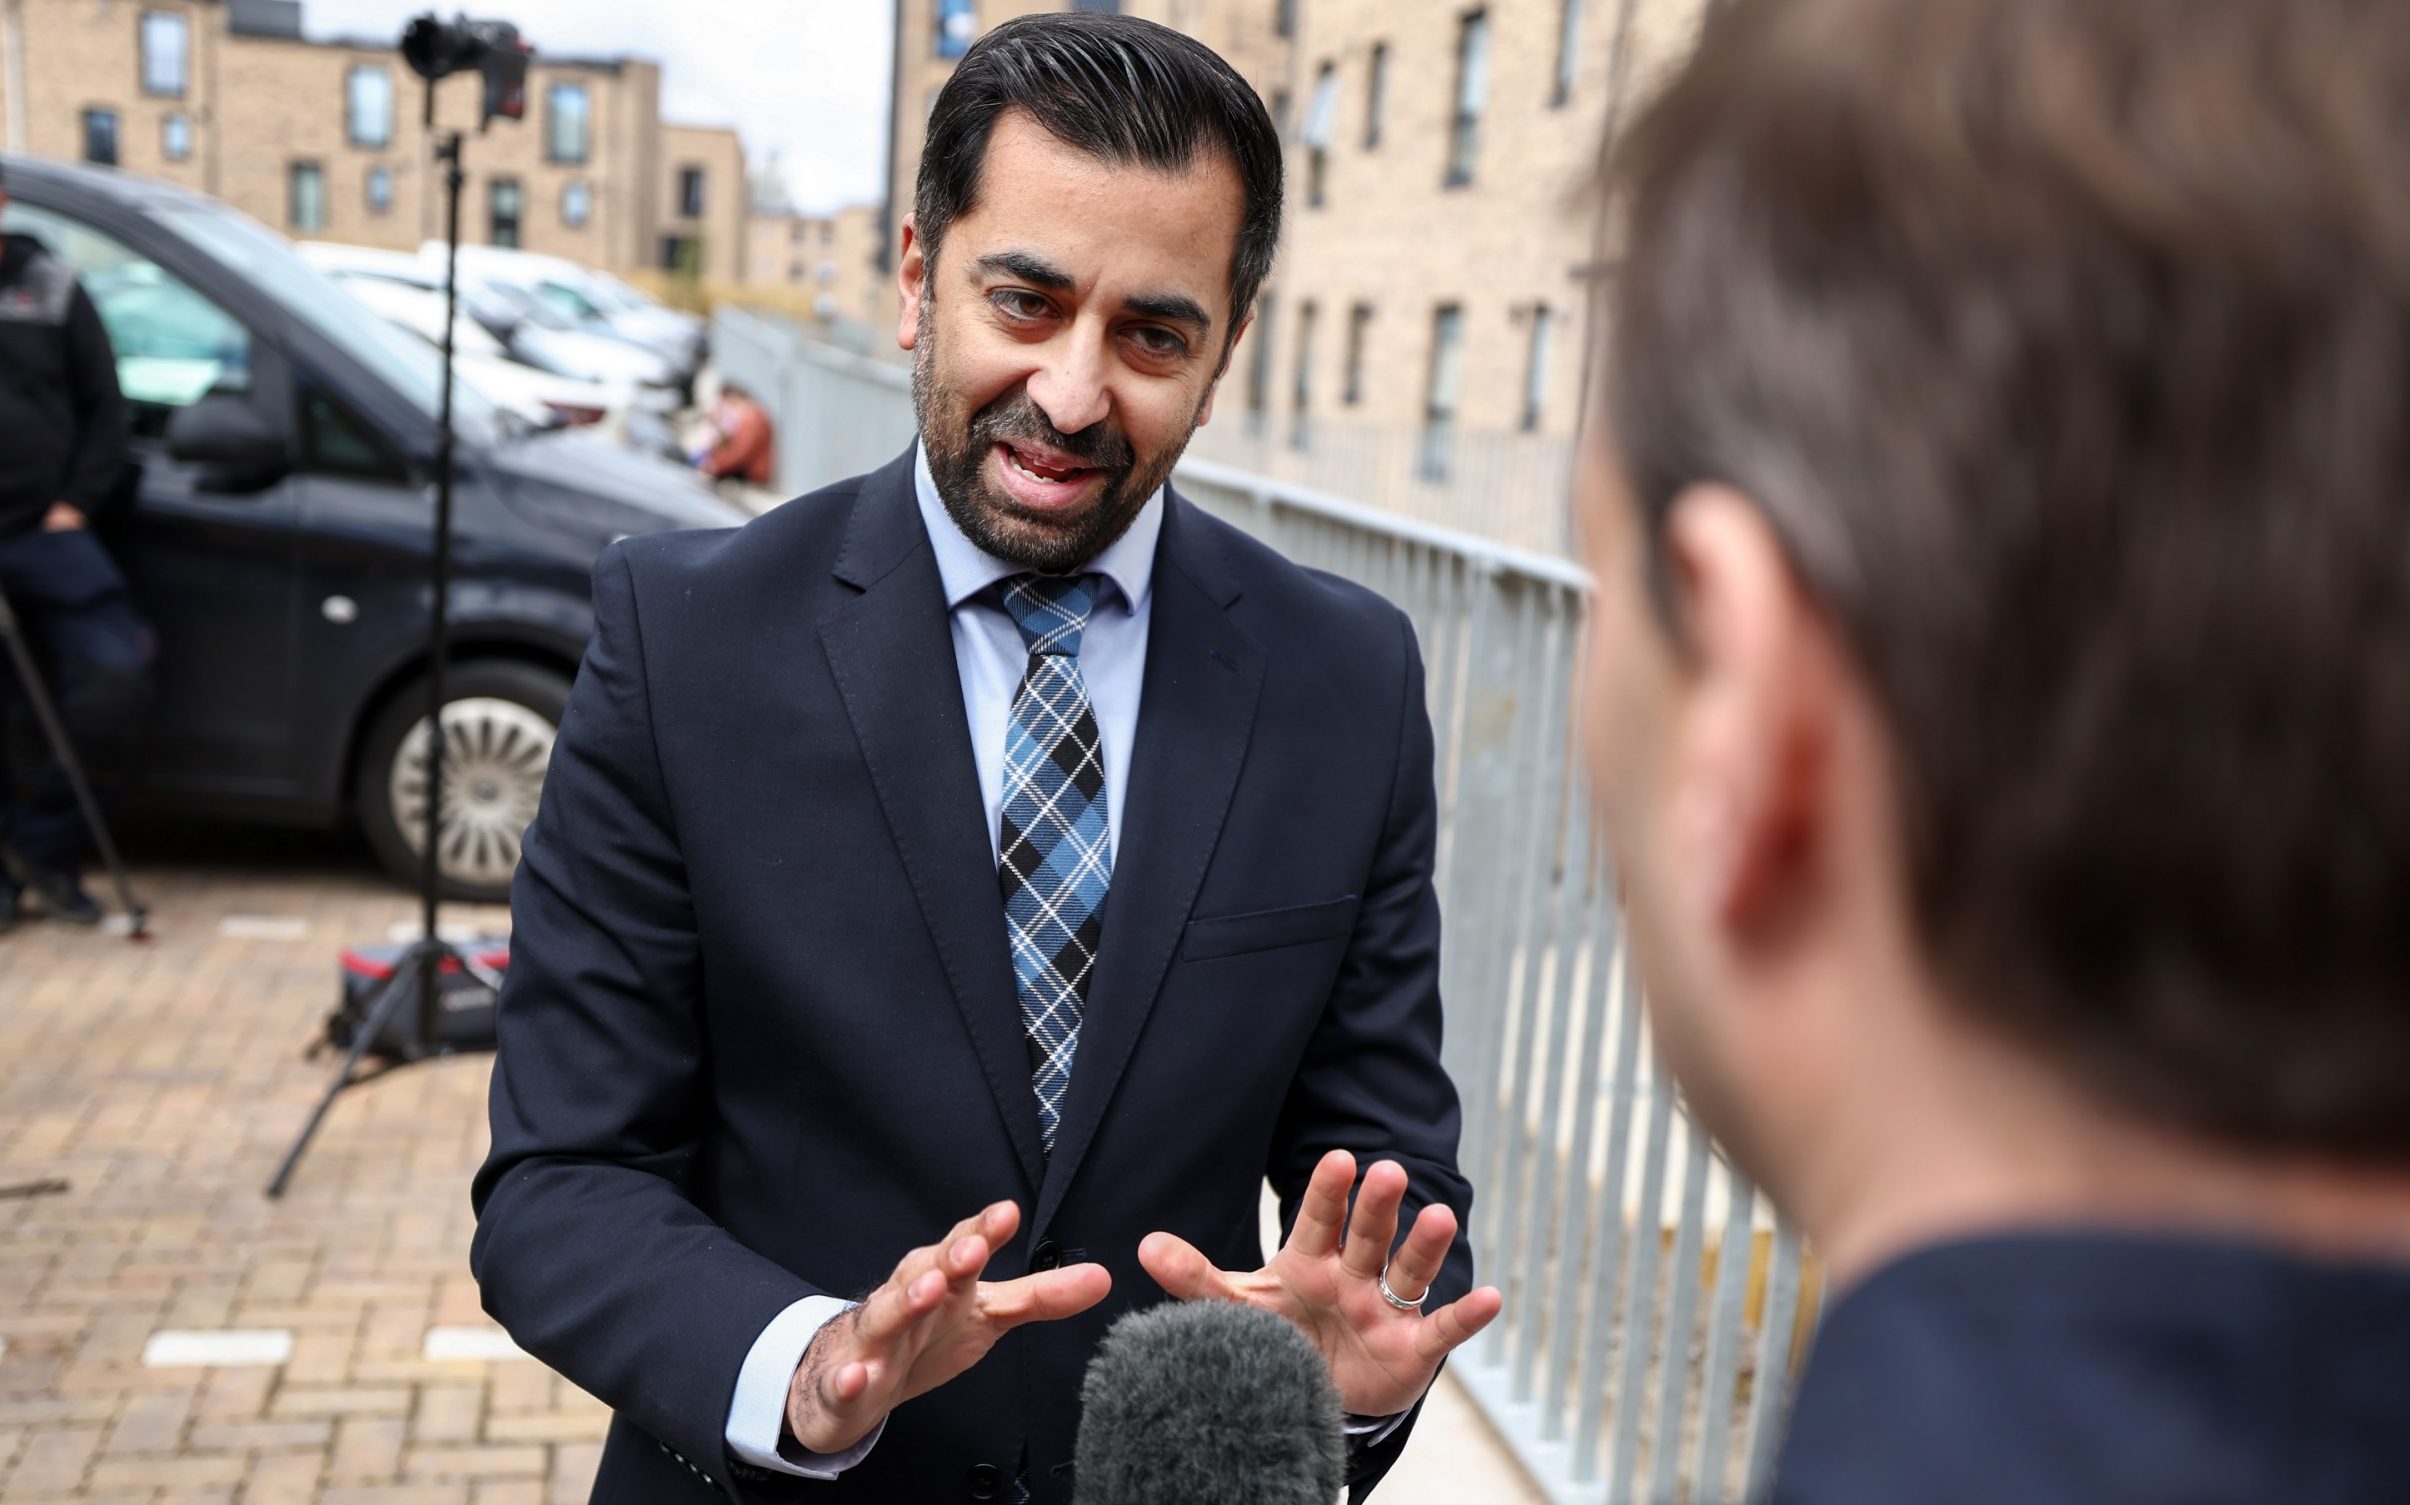 humza yousaf asks to meet snp defector as he scrambles for no-confidence vote support